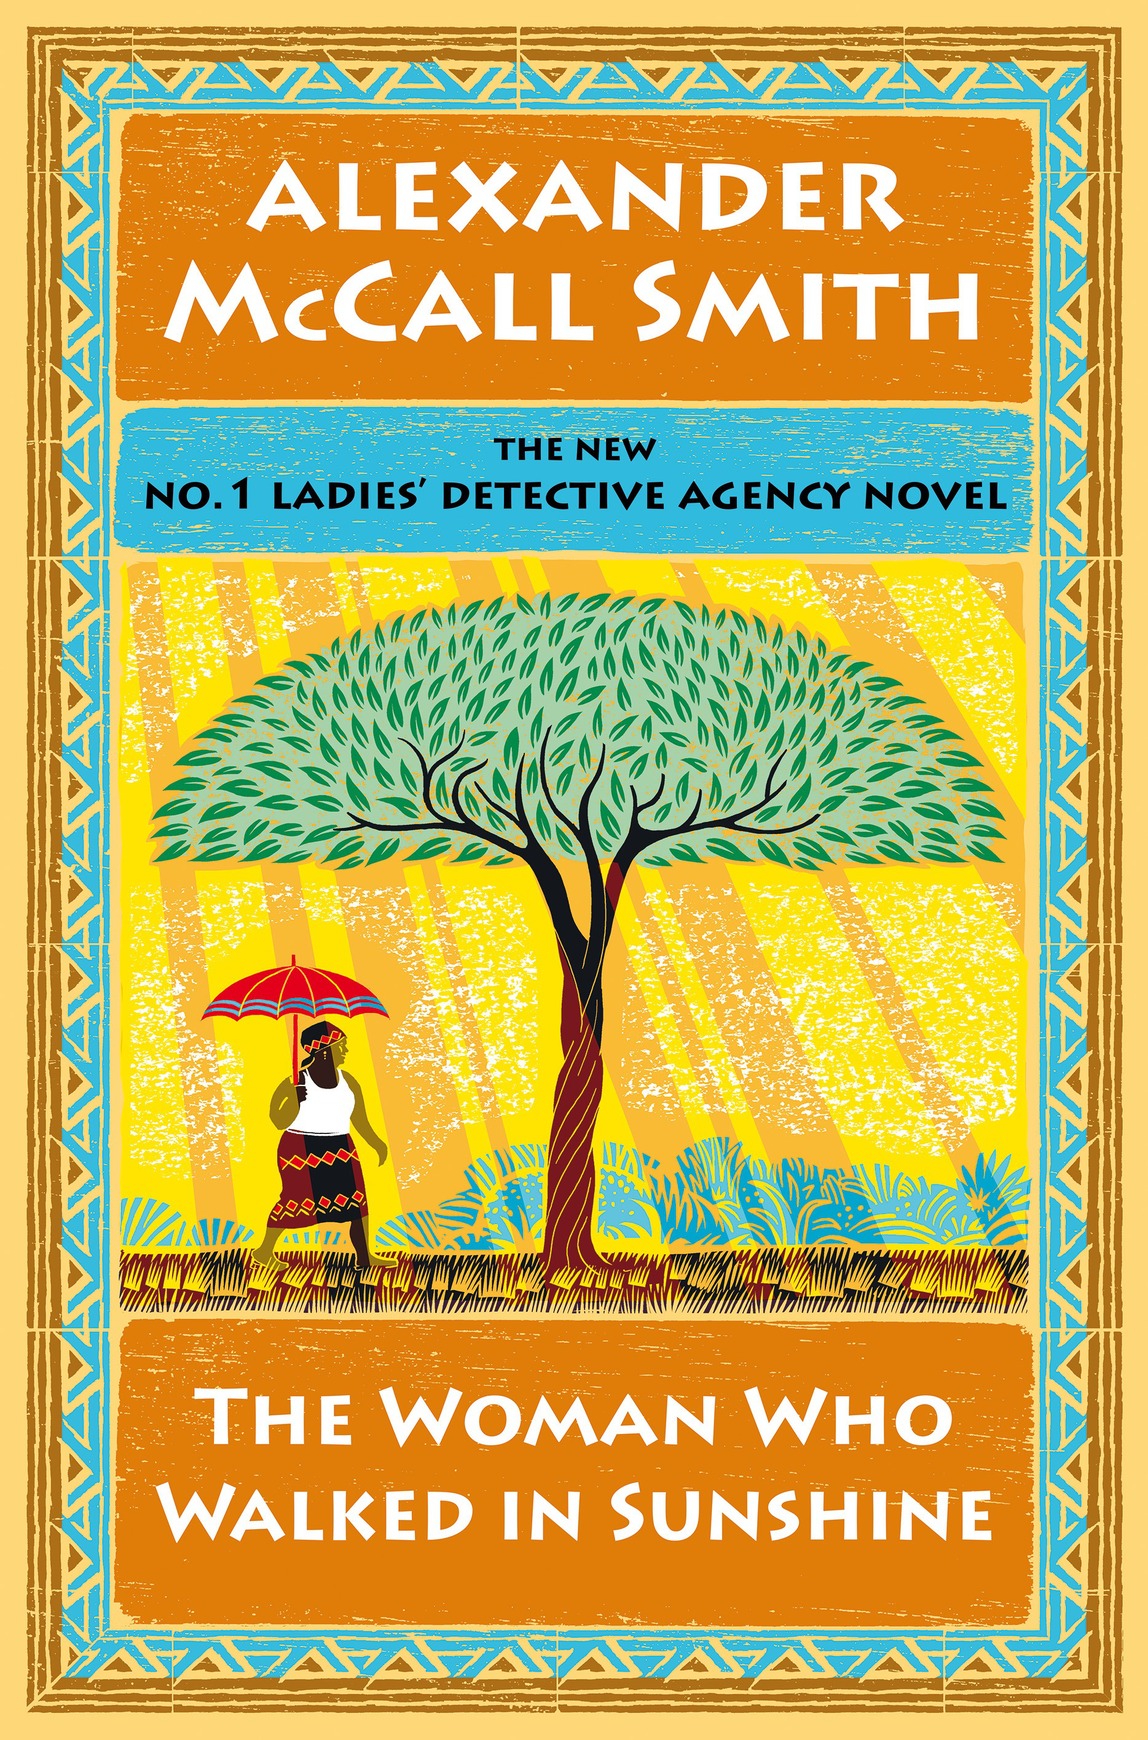 The Woman Who Walked in Sunshine (2015) by Alexander McCall Smith